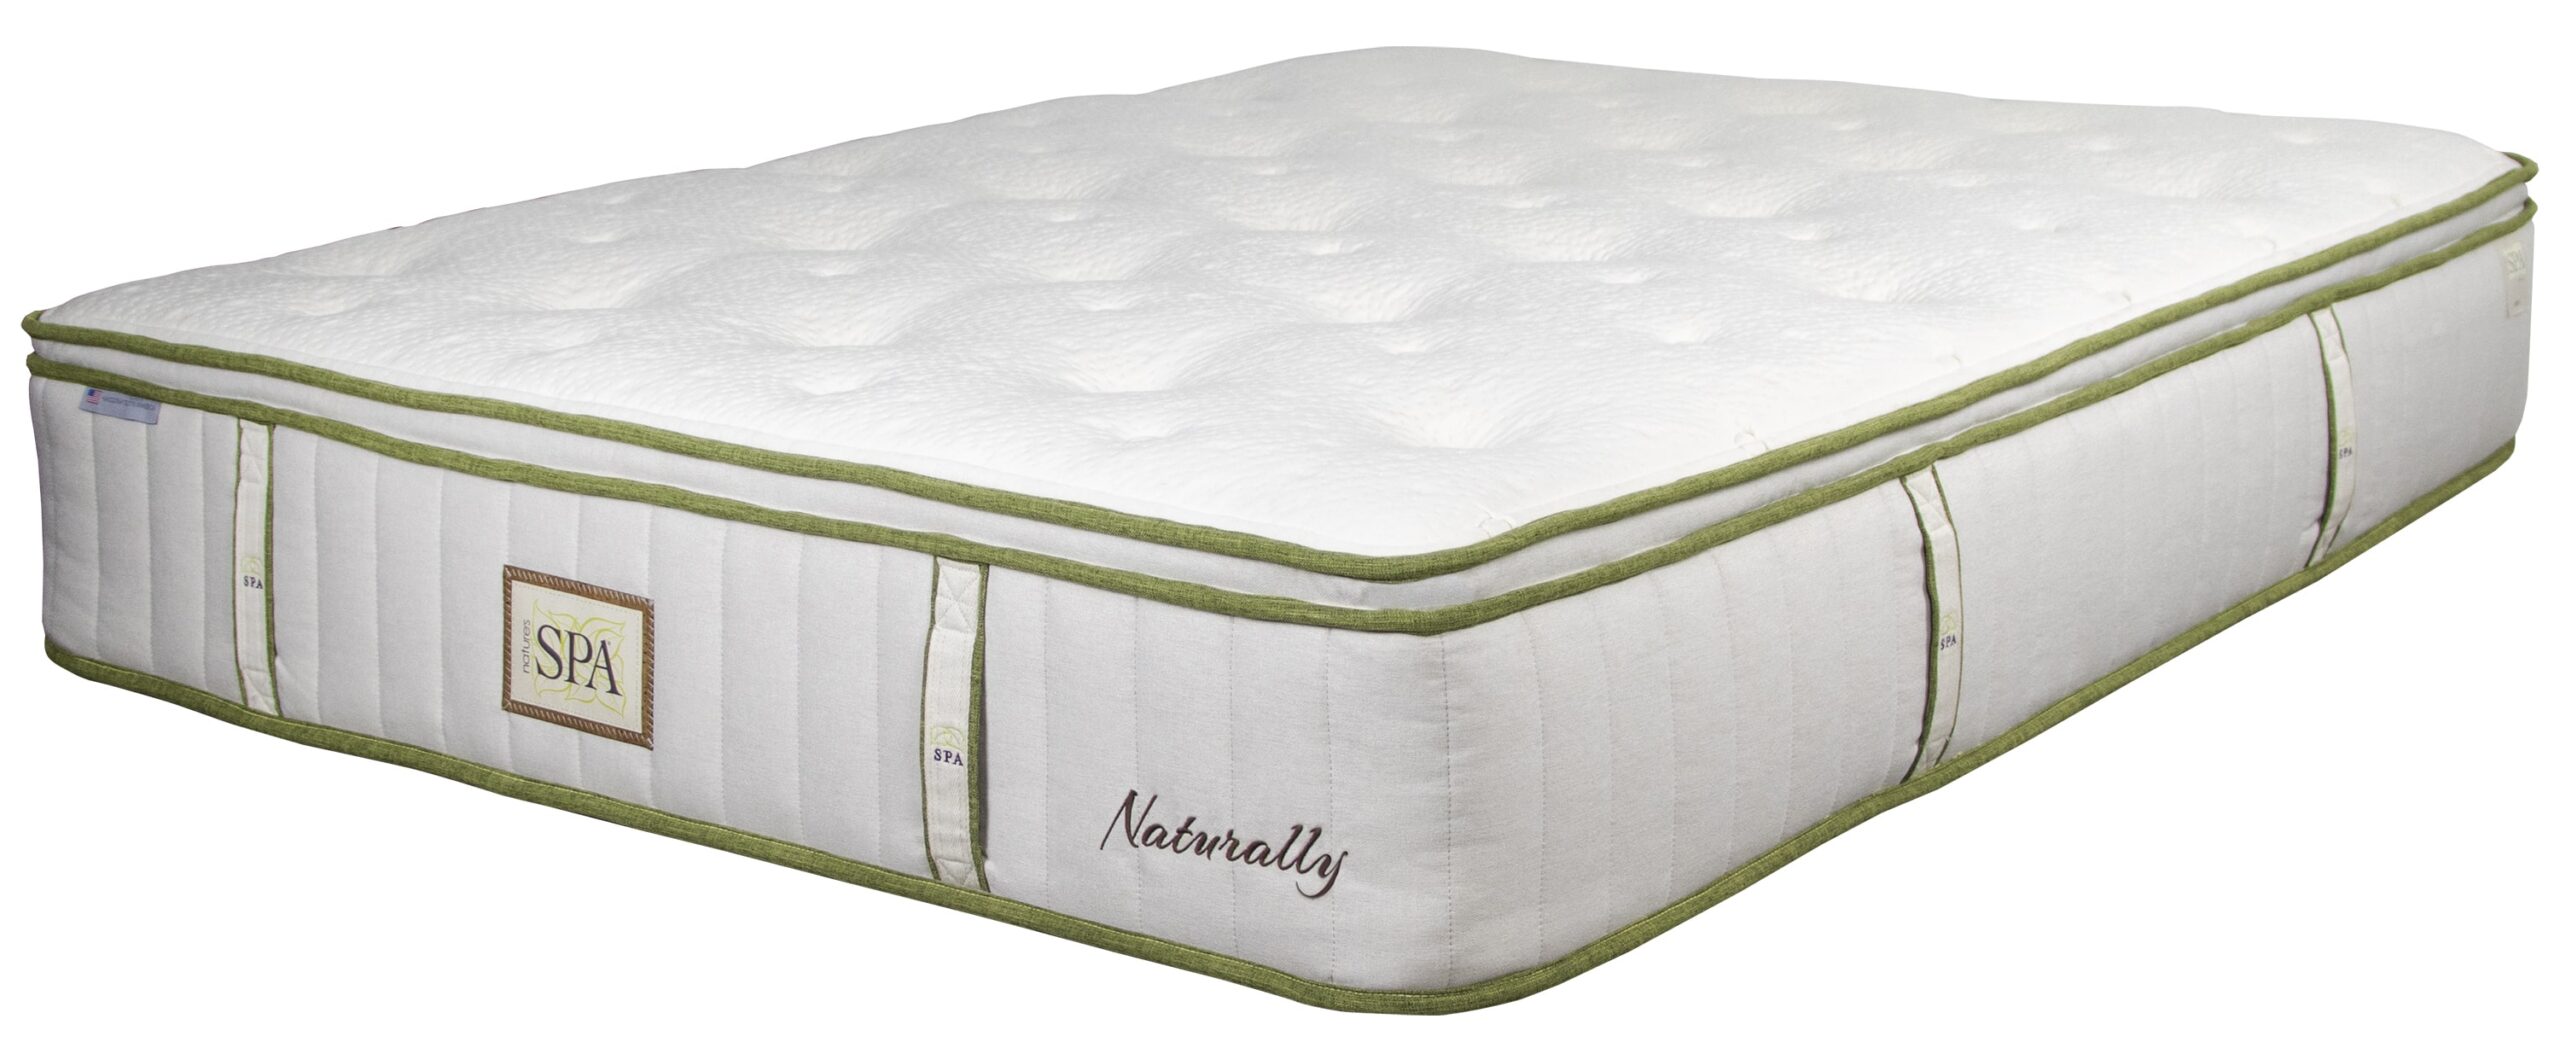 nature's spa oasis mattress review